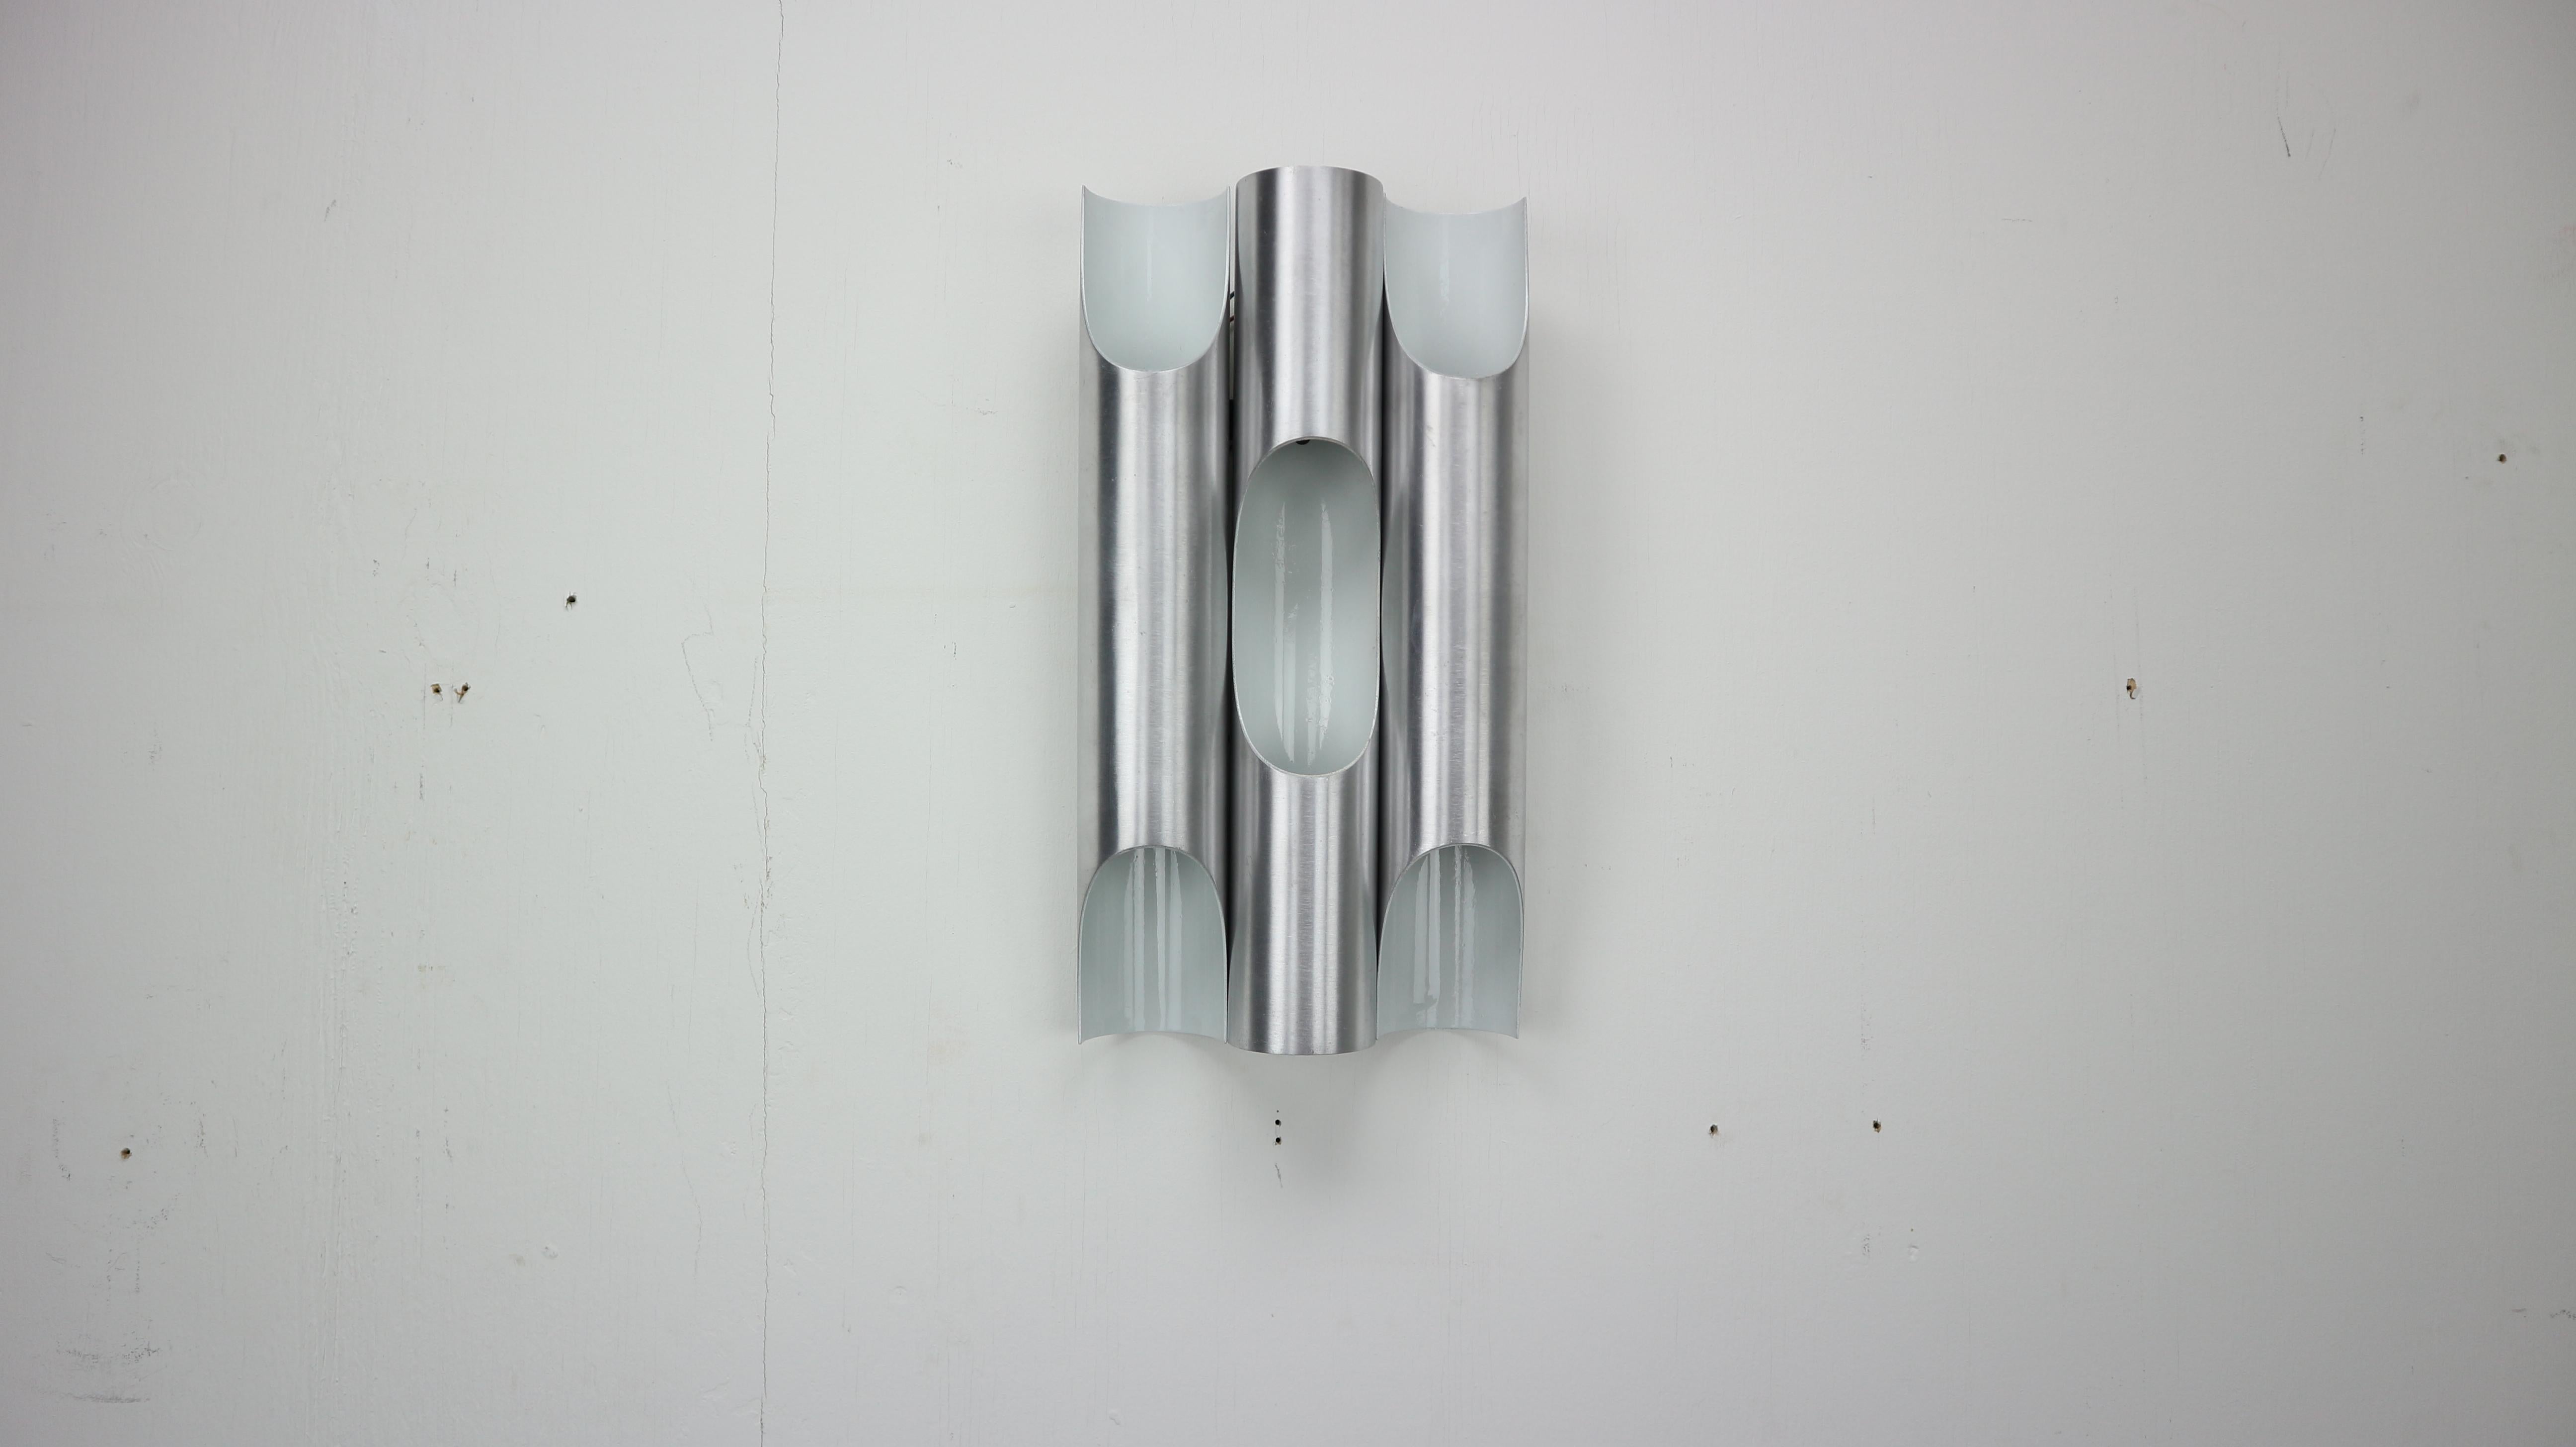 Set of two- RAAK Fuga wall lights by Maija Liisa Komulainen, made in 1960's Netherlands.
A clean pair executed in brushed aluminum and white enamel finish. An incredibly sculptural design inspired by the pipe organs of old European churches.